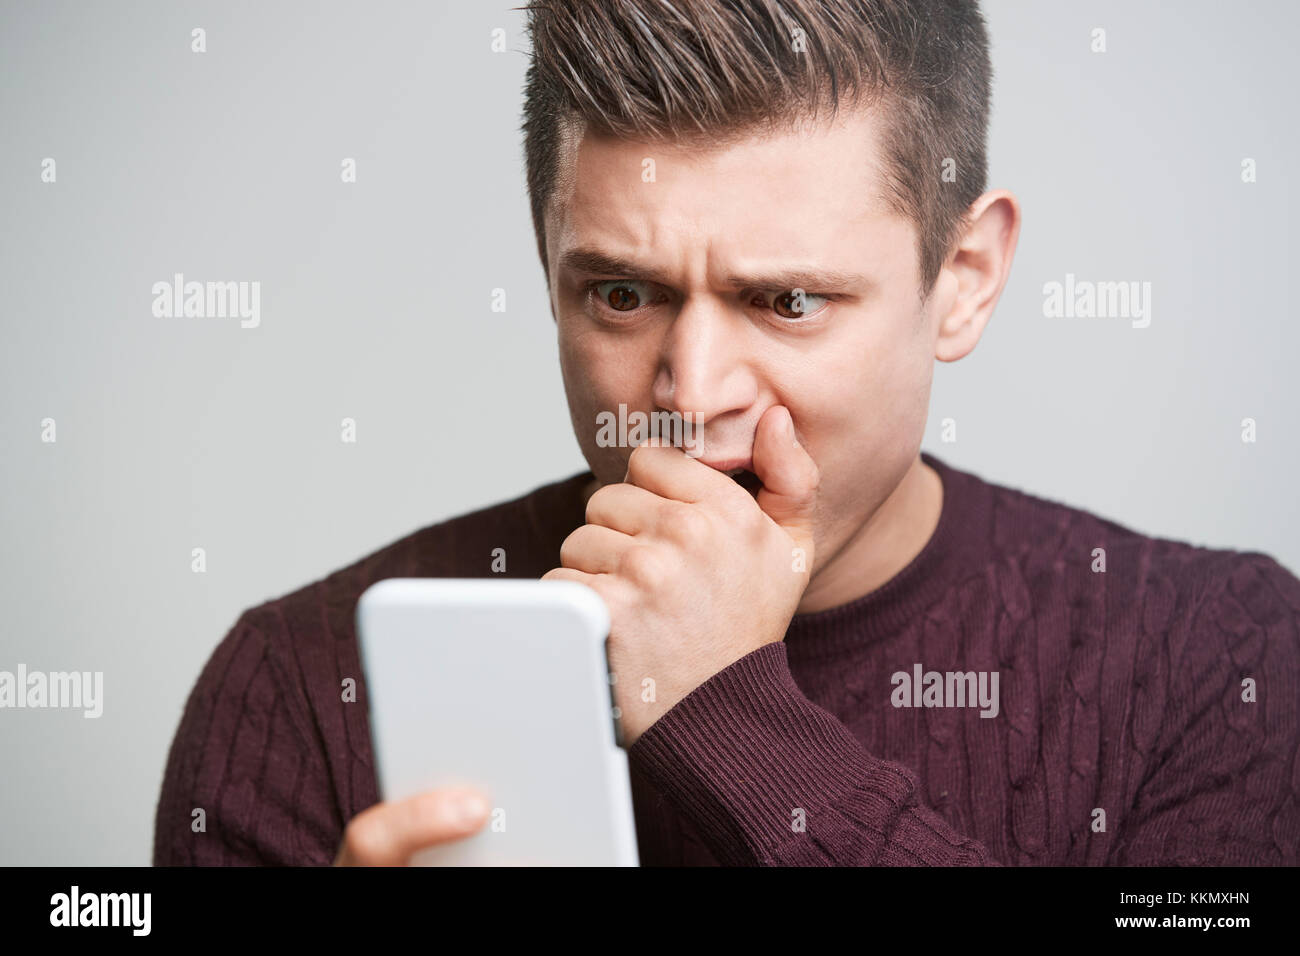 Cropped portrait of a shocked young man using a smartphone Stock Photo